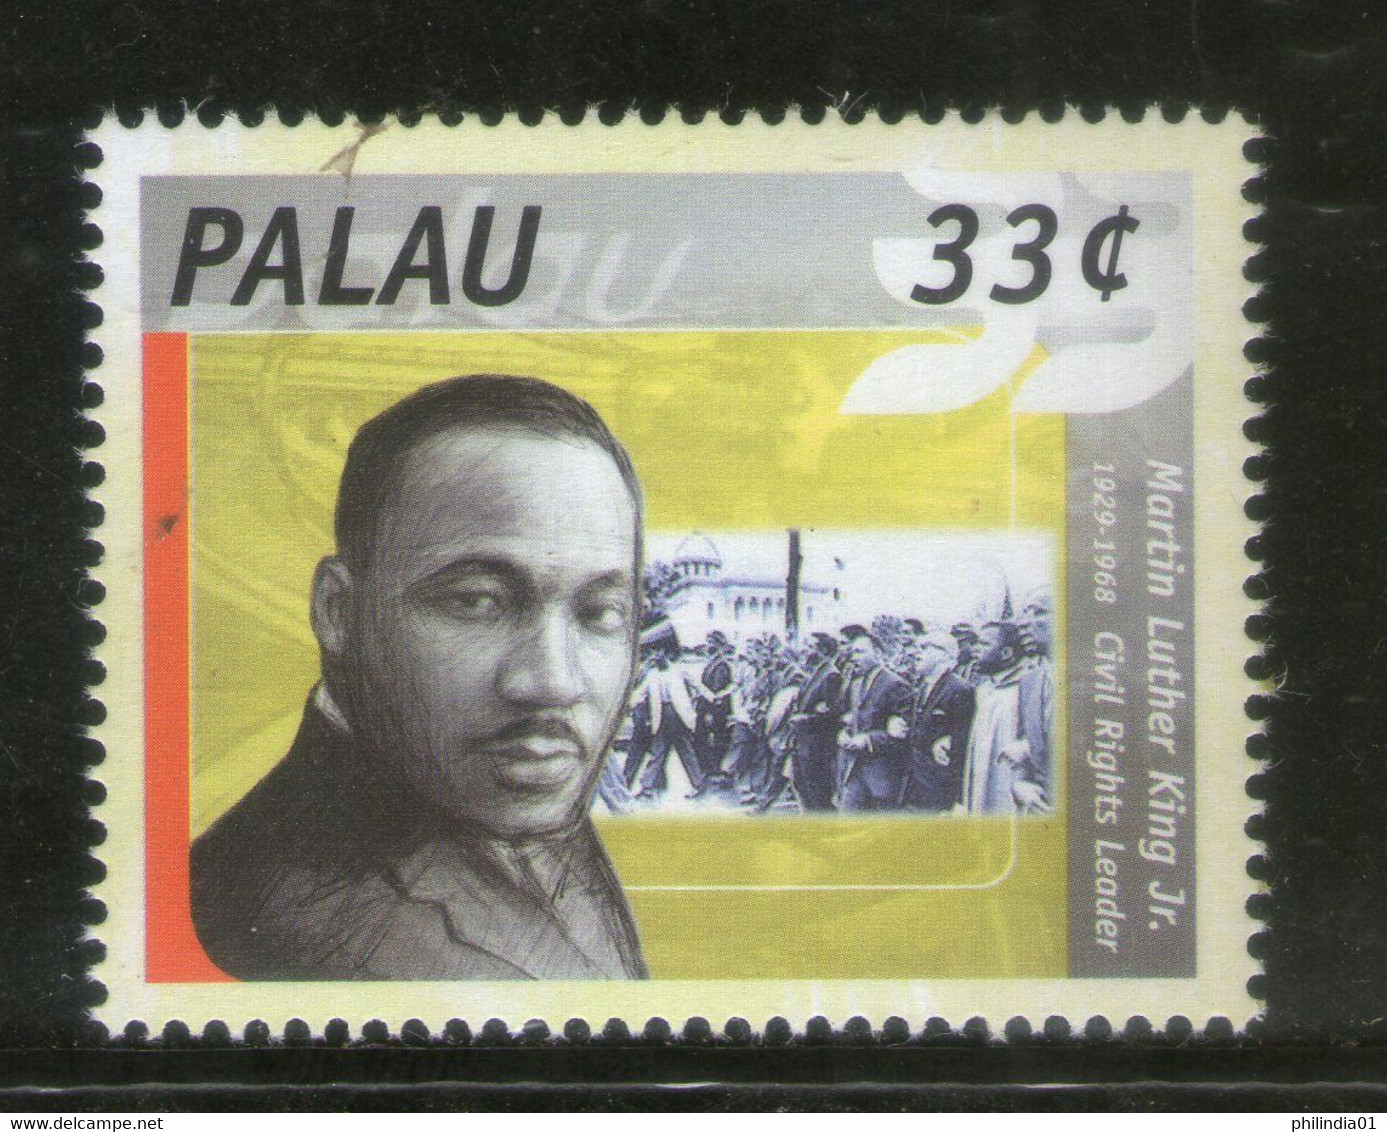 Palau 2000 Martin Luther King Noble Prize Winner Sc 557l MNH # 1973 - Martin Luther King